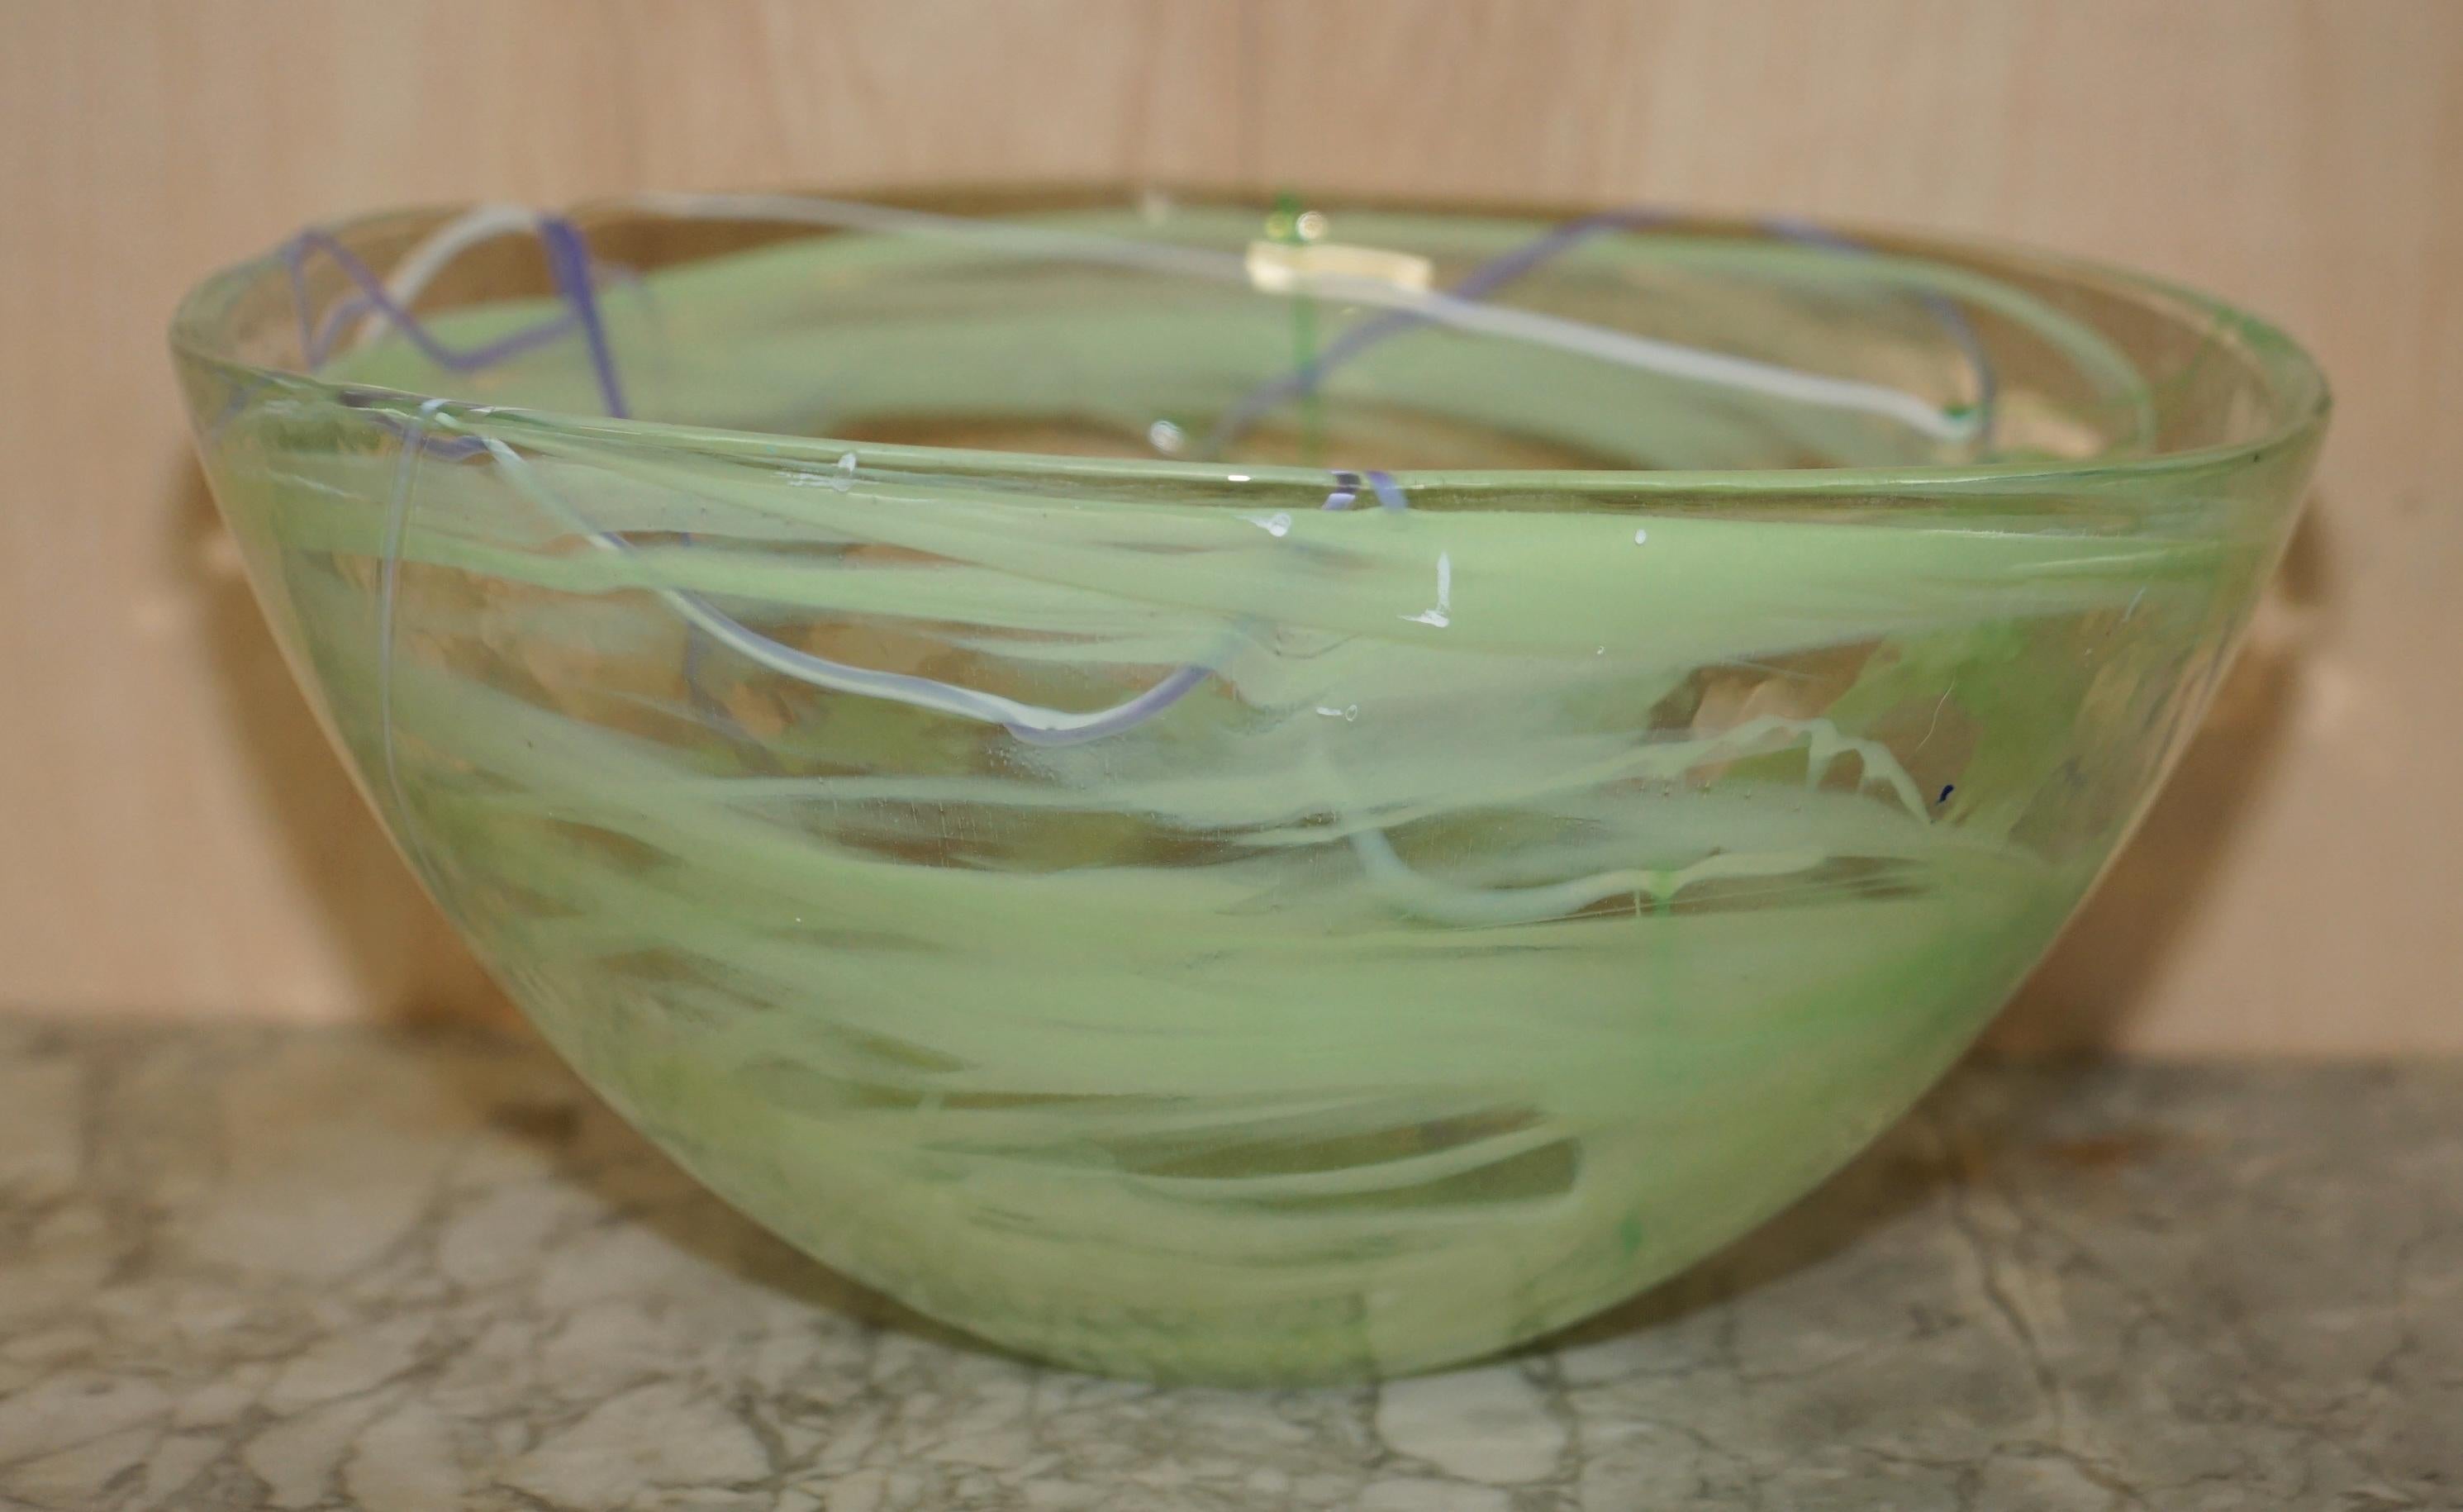 We are delighted to offer for sale this stunning decorative Anna Ehrner circa 1980's glass Kosta Boda large bowl.

This piece looks sublime from every angle, it doesn’t have any damage that I can see, it is very decorative and signed to the